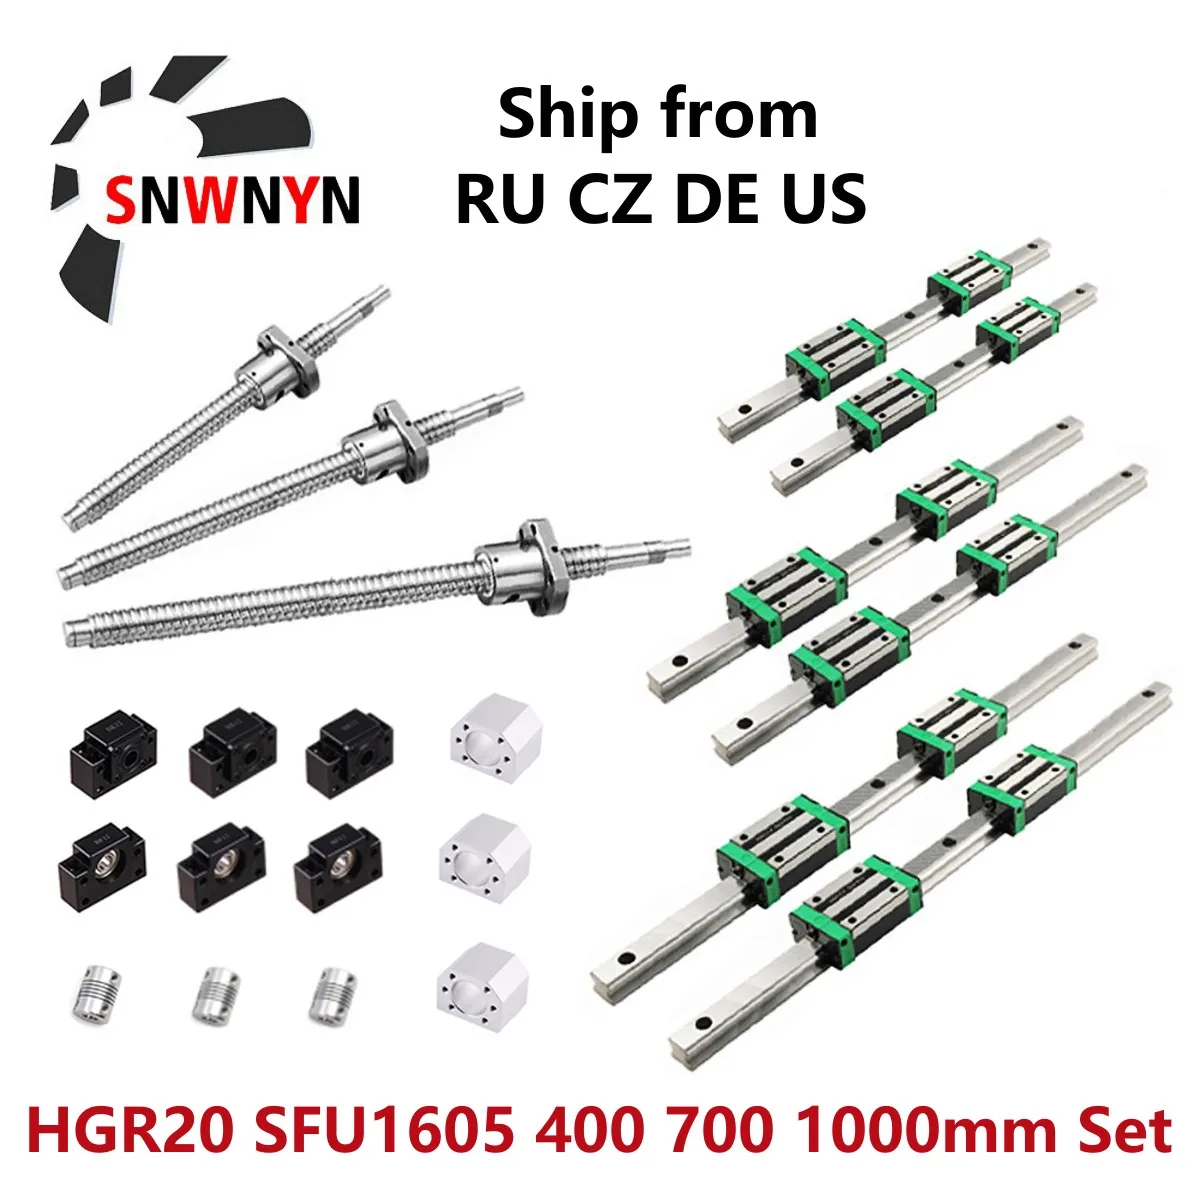 

Kit CNC:2 HGR20 Linear Rail 4 Block + SFU1605 Ballscrew 400 700 1000mm With BKBF12 End Support & Nut Housing & Coupling